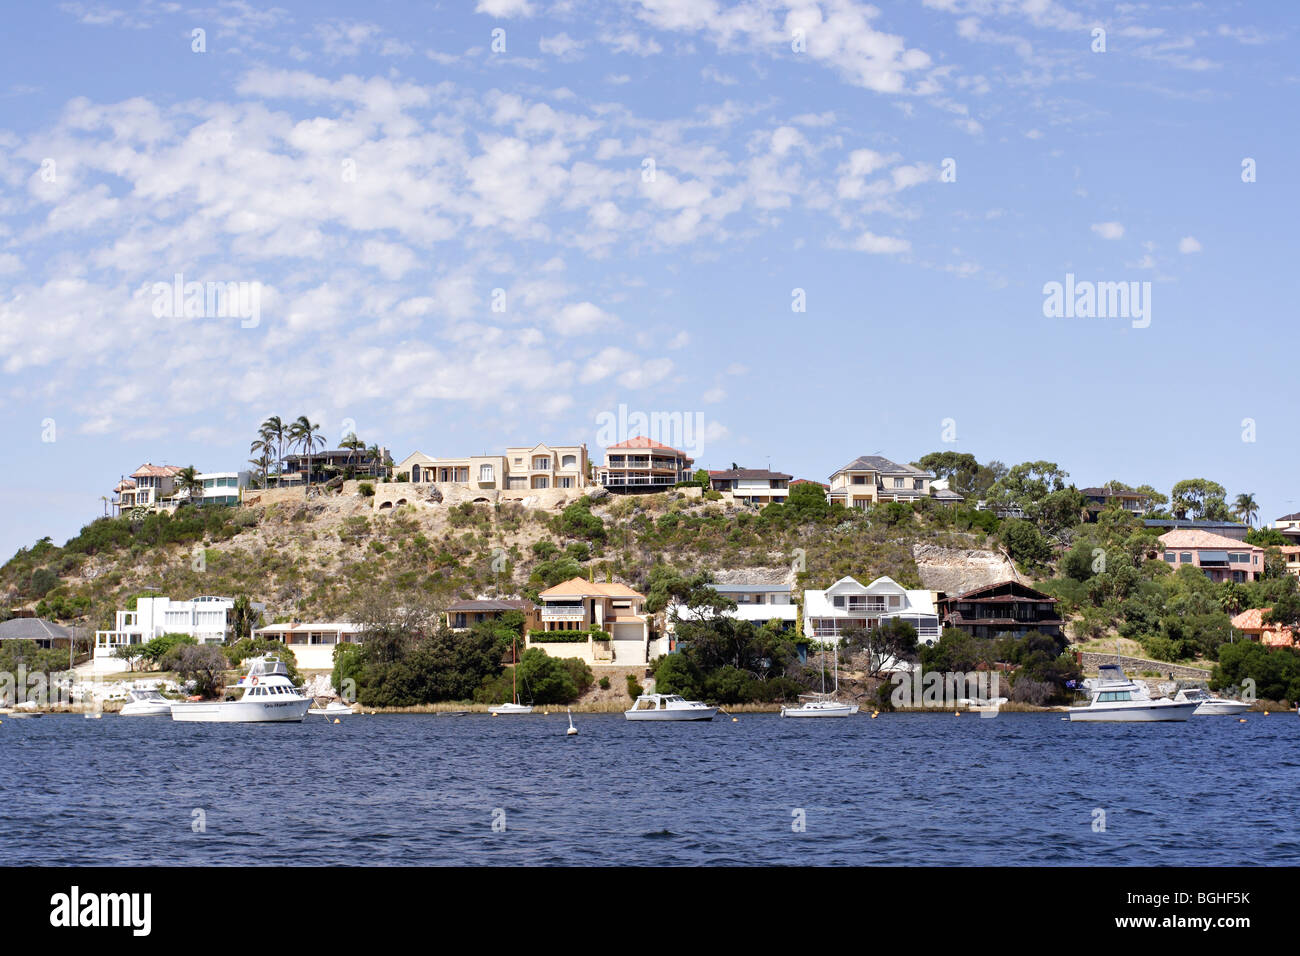 Luxury homes on the bank of Swan River between Perth and Fremantle in Western Australia. Stock Photo